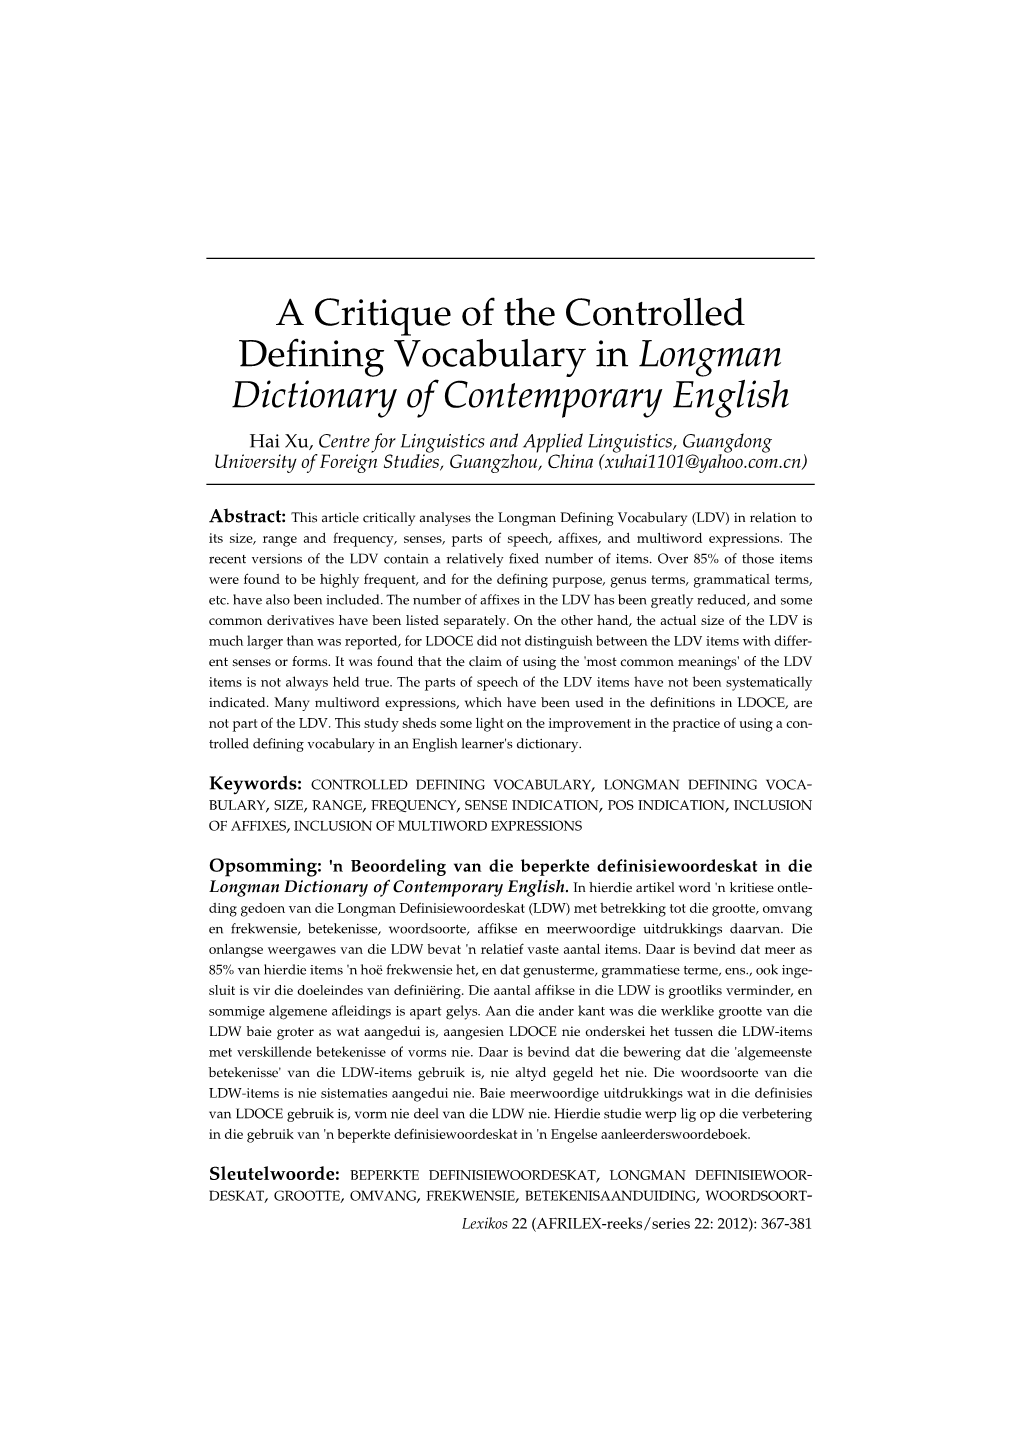 A Critique of the Controlled Defining Vocabulary in Longman Dictionary